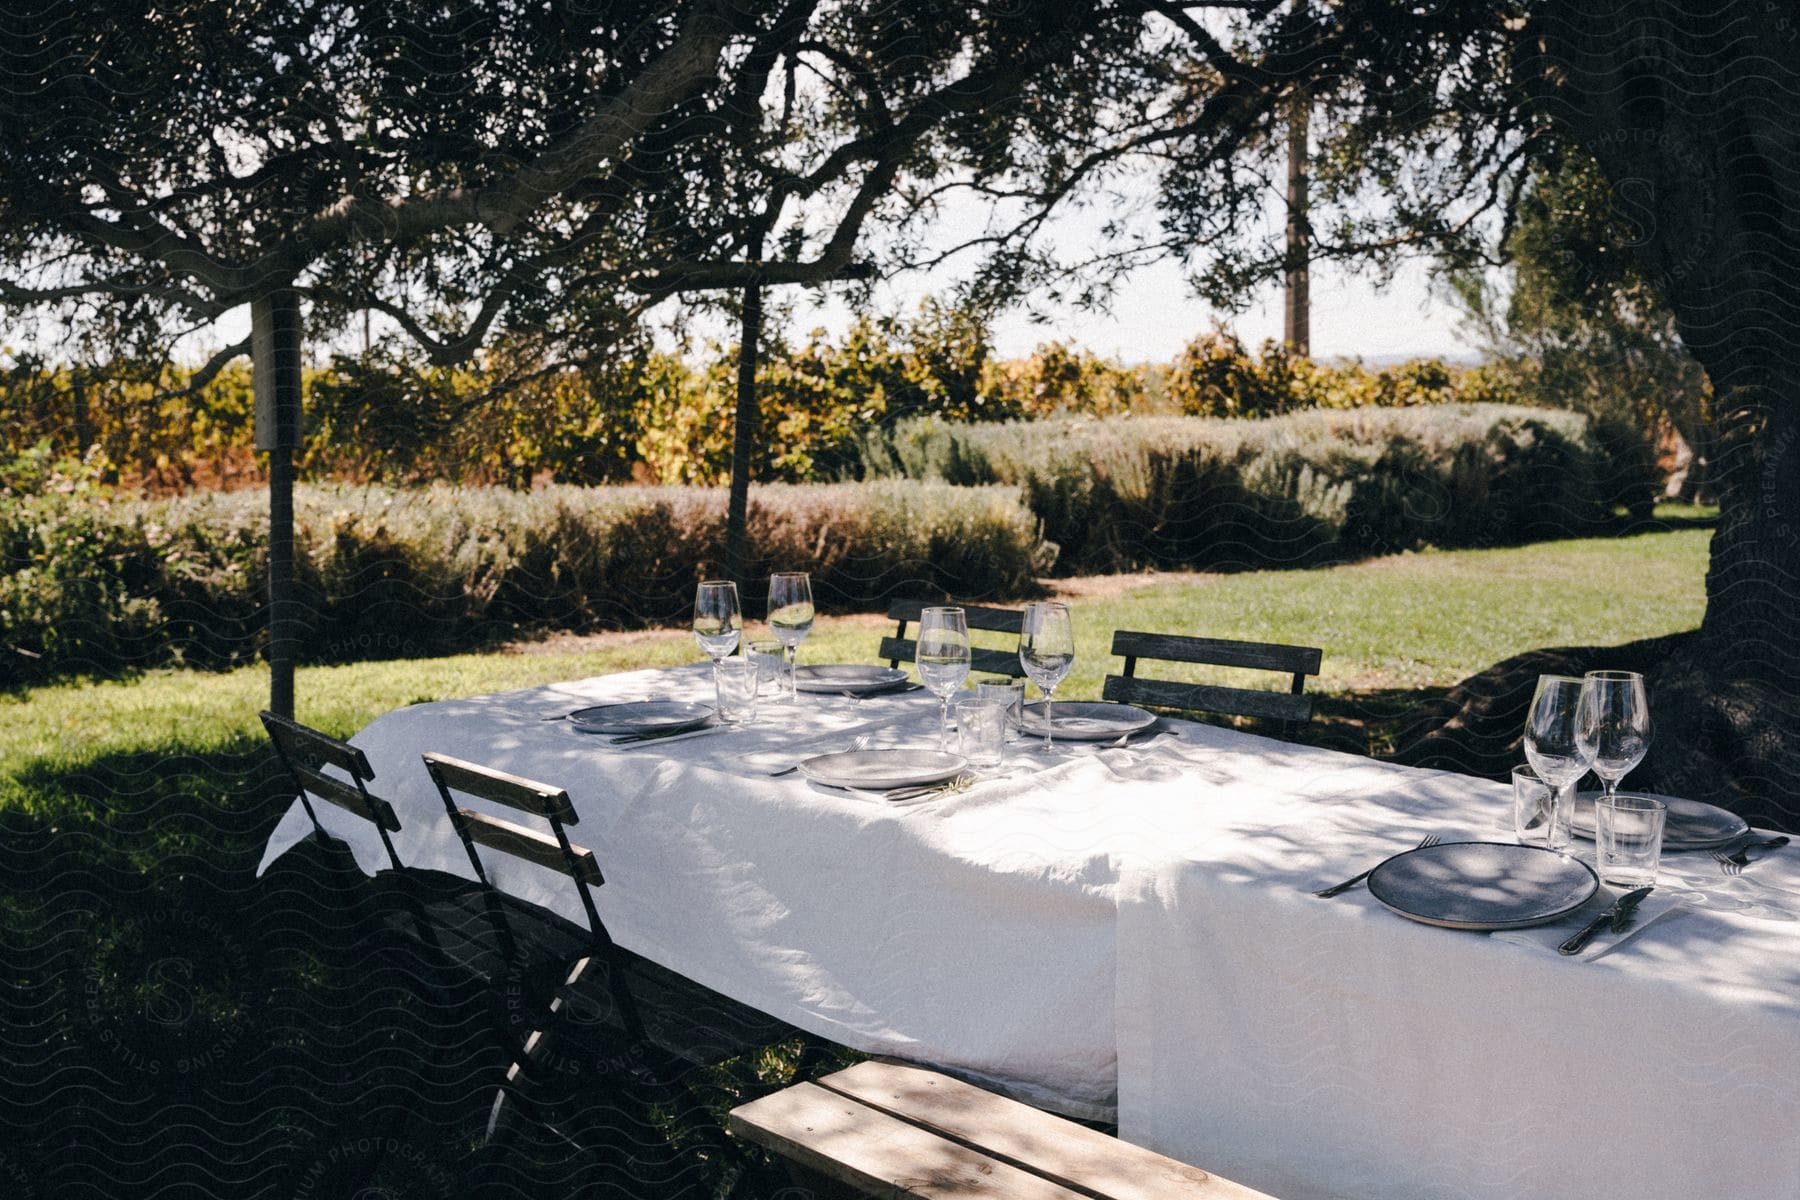 A dining table with tableware and water glasses is set outdoors under a shade tree.